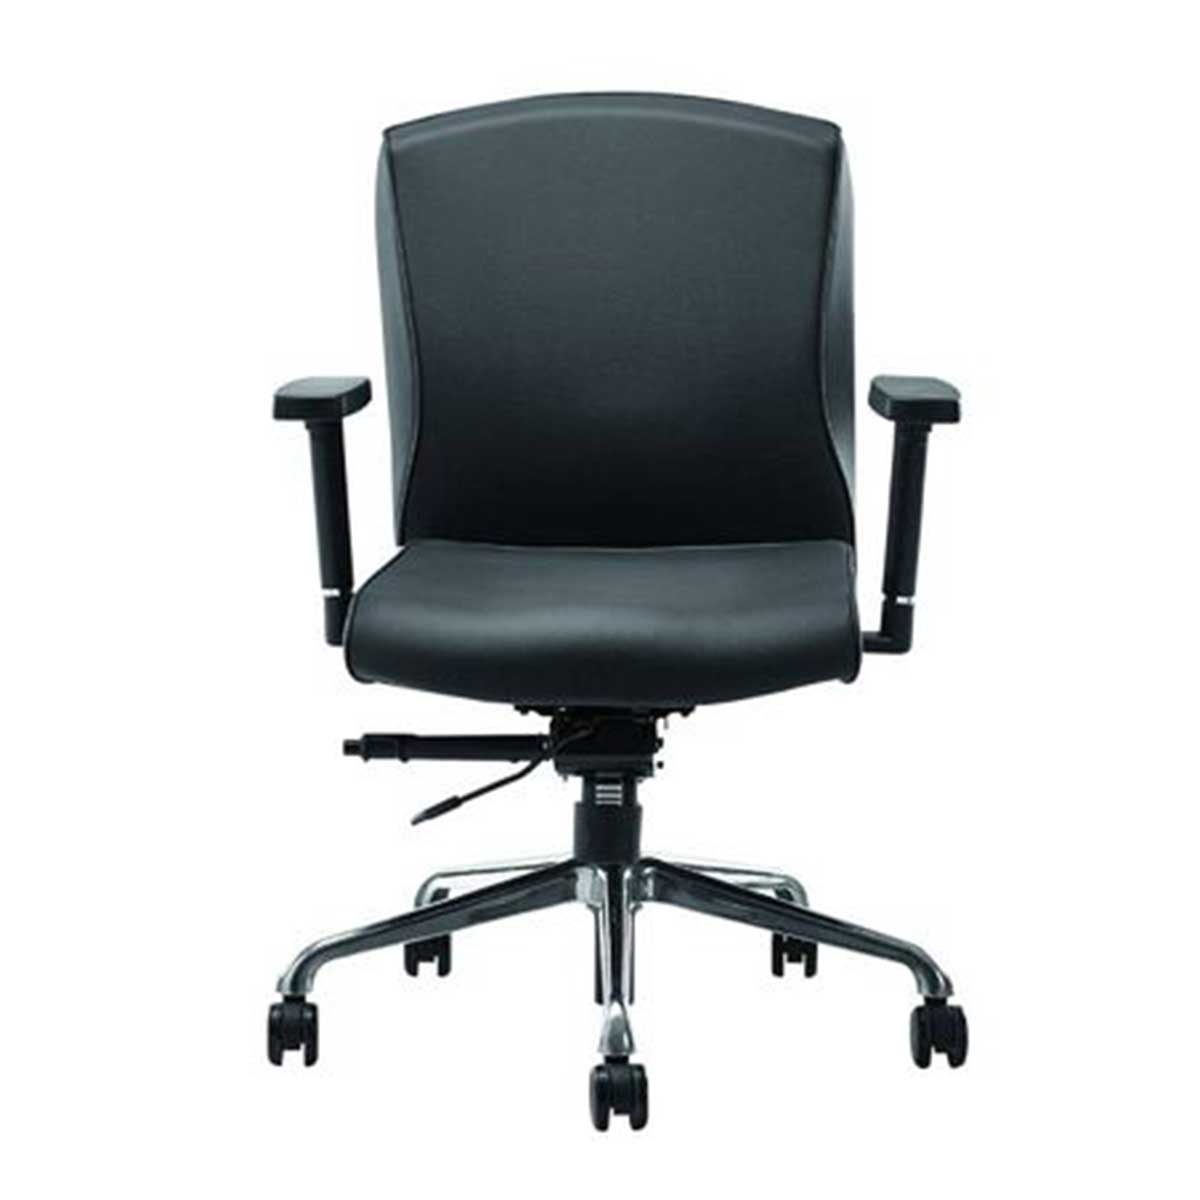 Low Back Office Chair Manufacturers, Suppliers in Chandni Chowk